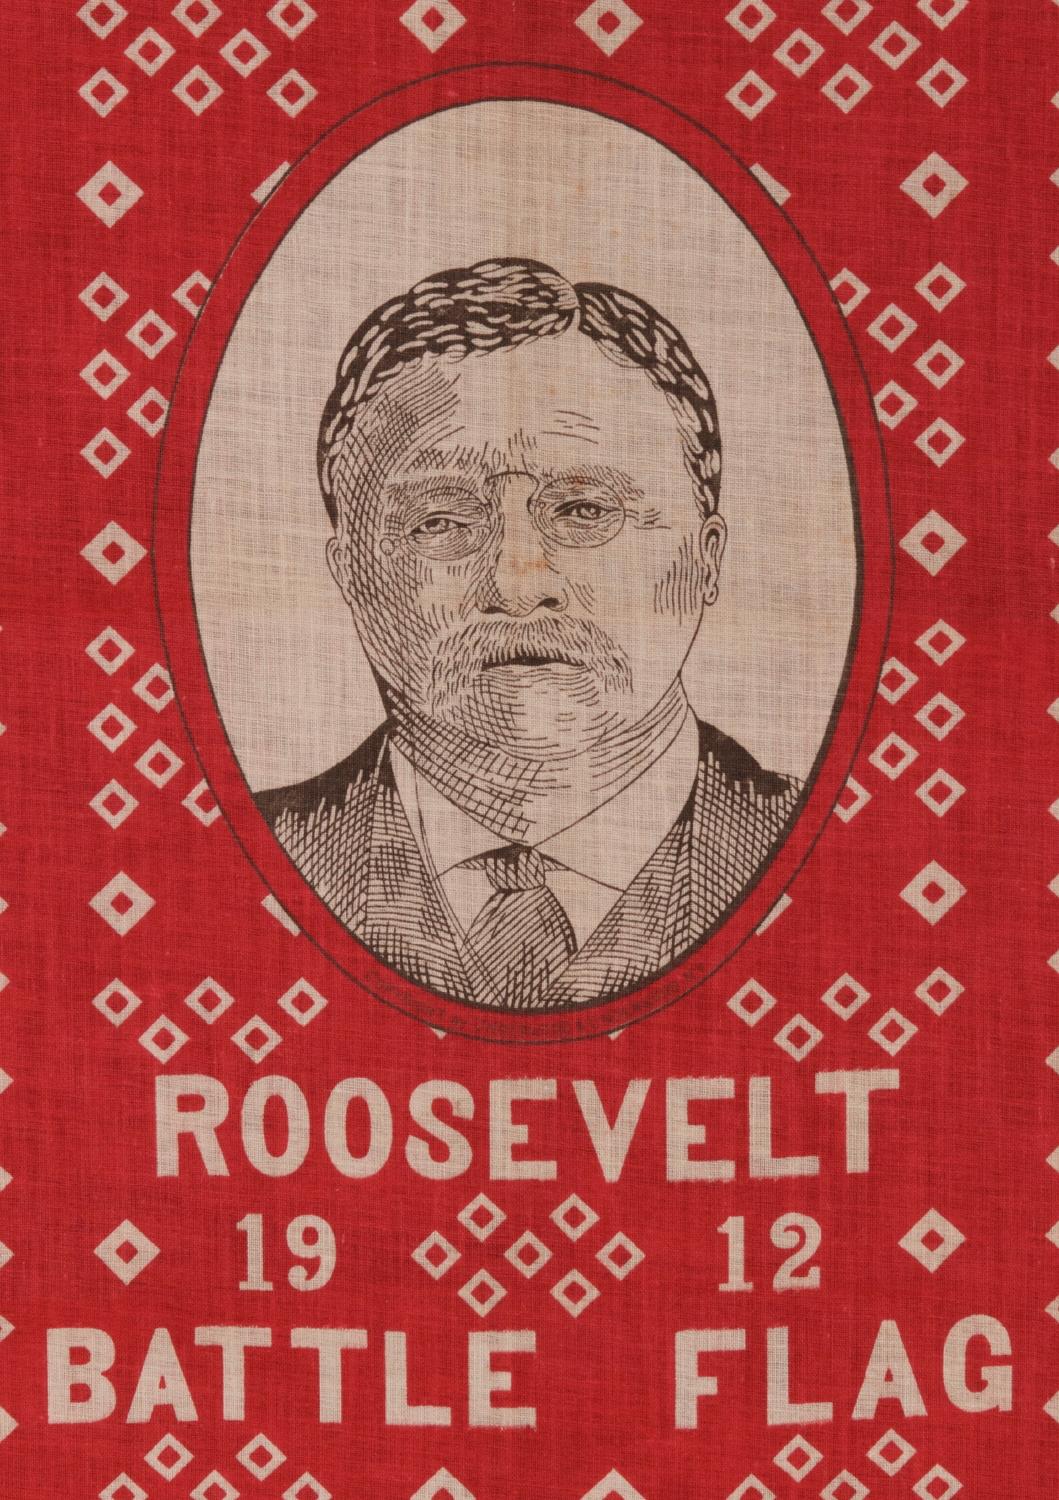 American Roosevelt Battle Flag Kerchief, Made for the 1912 Presidential Campaign